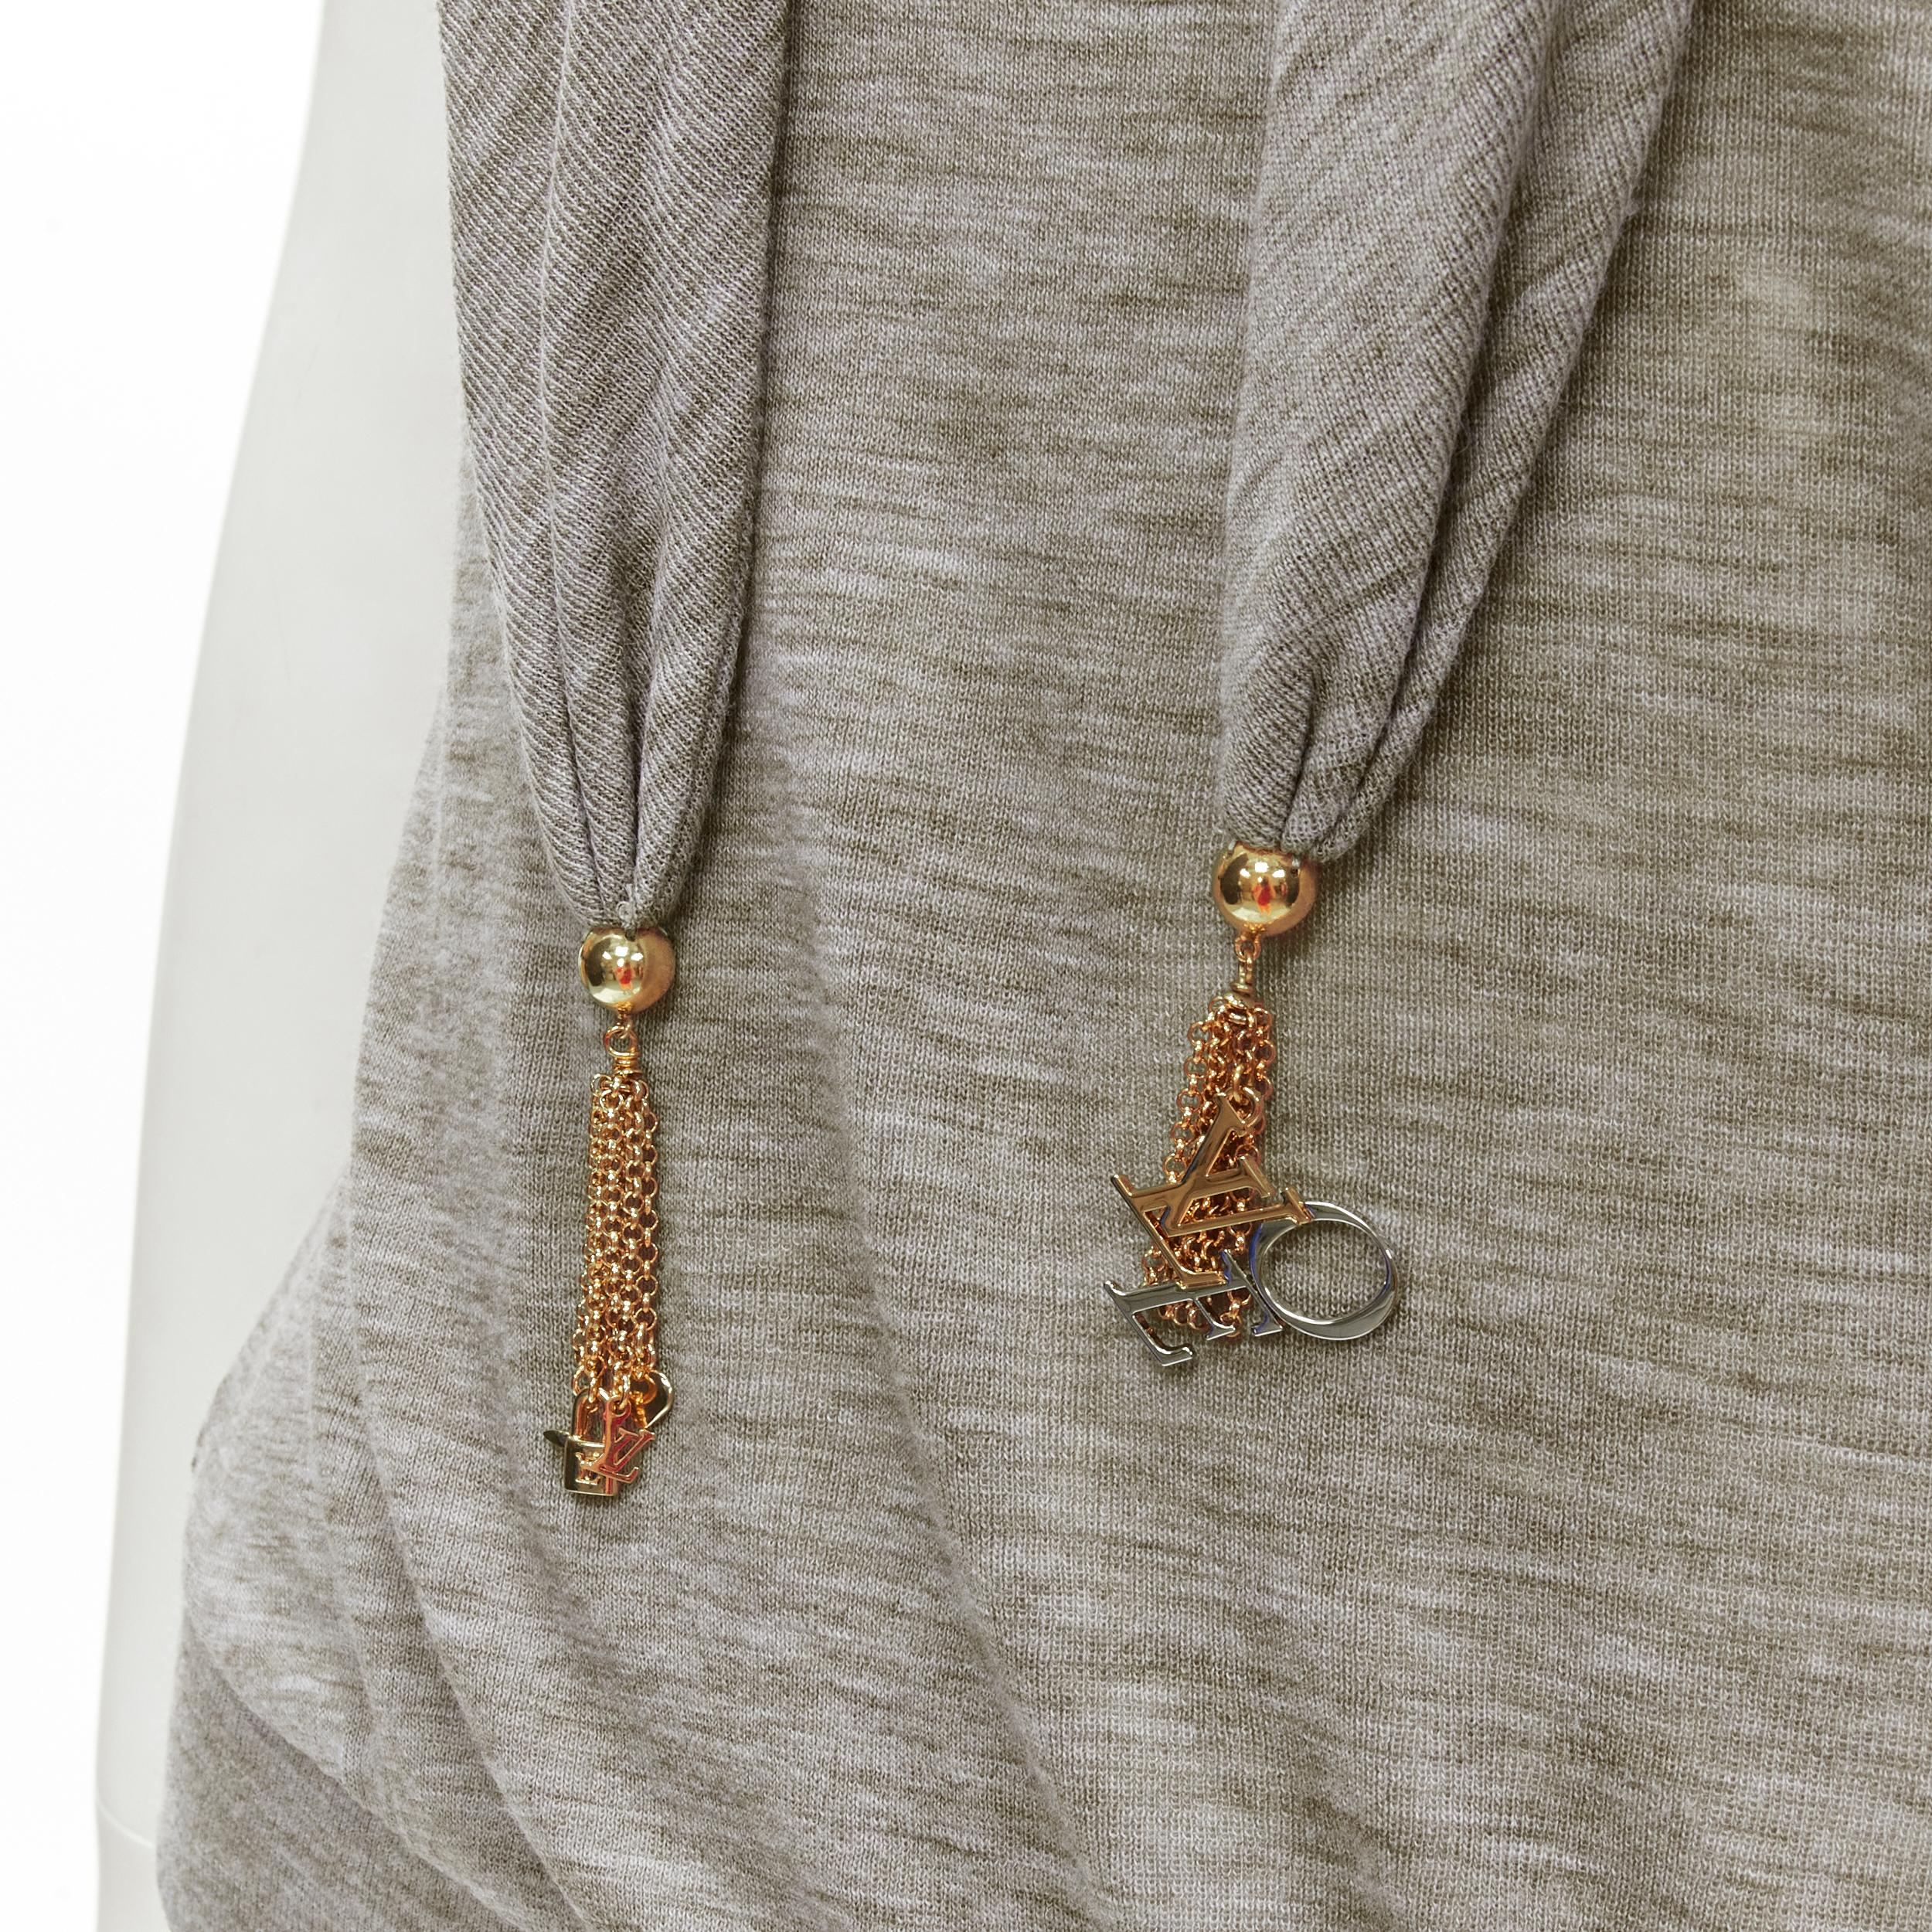 LOUIS VUITTON heather grey LVOE tassel charm scarf collar pullover top  S
Brand: Louis Vuitton
Designer: Marc Jacobs
Collection: LVOE 
Material: Feels like wool
Color: Grey
Pattern: Solid
Extra Detail: V-Neckline with attached scarf. Mixed metal LV